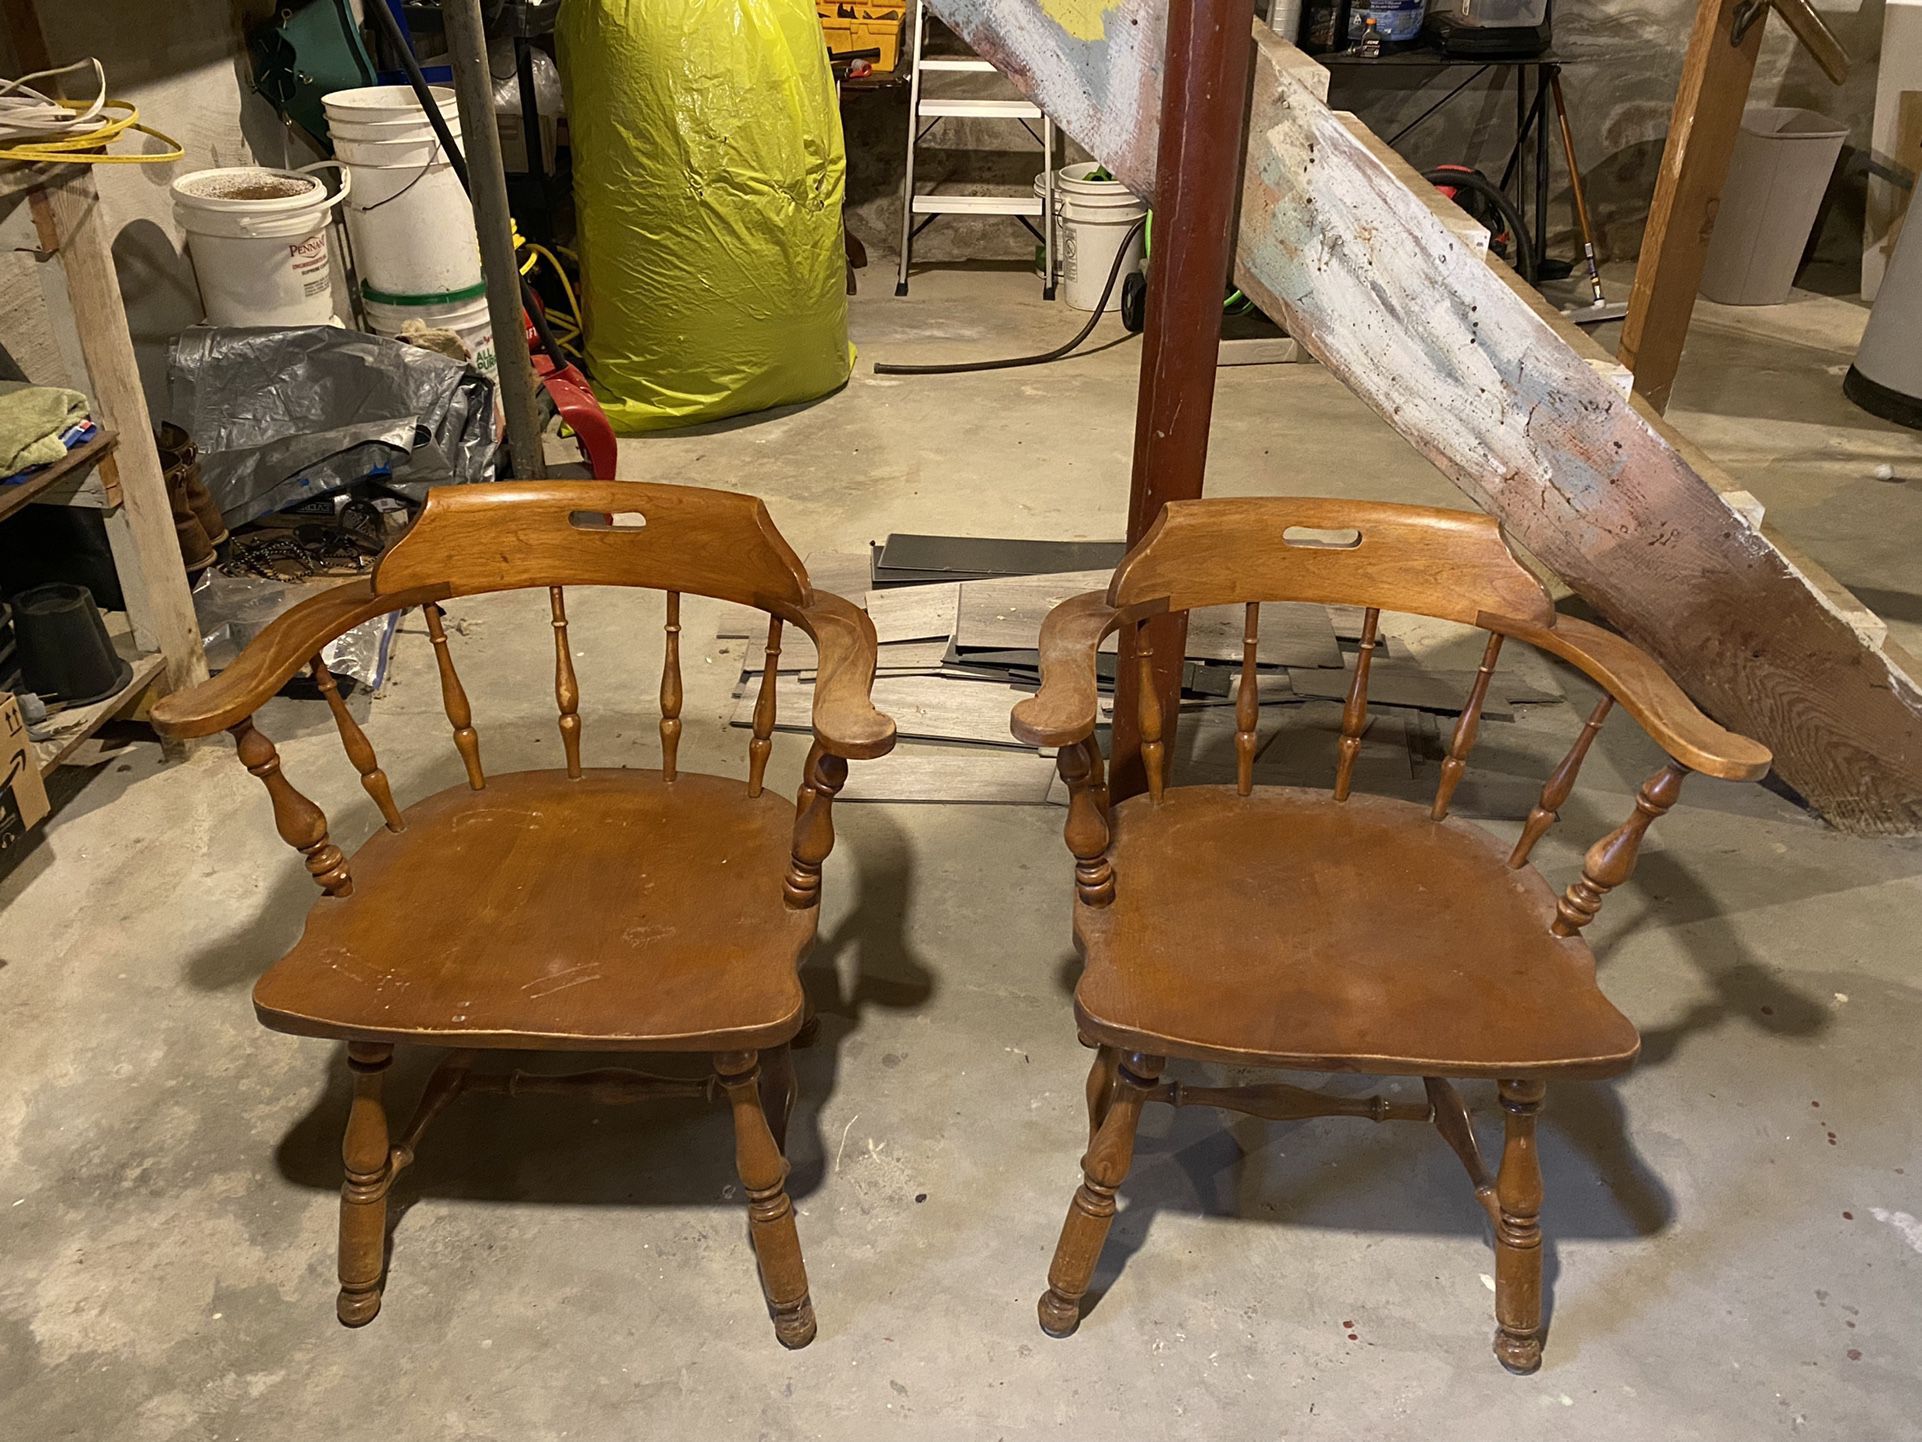 Wooden Chairs 